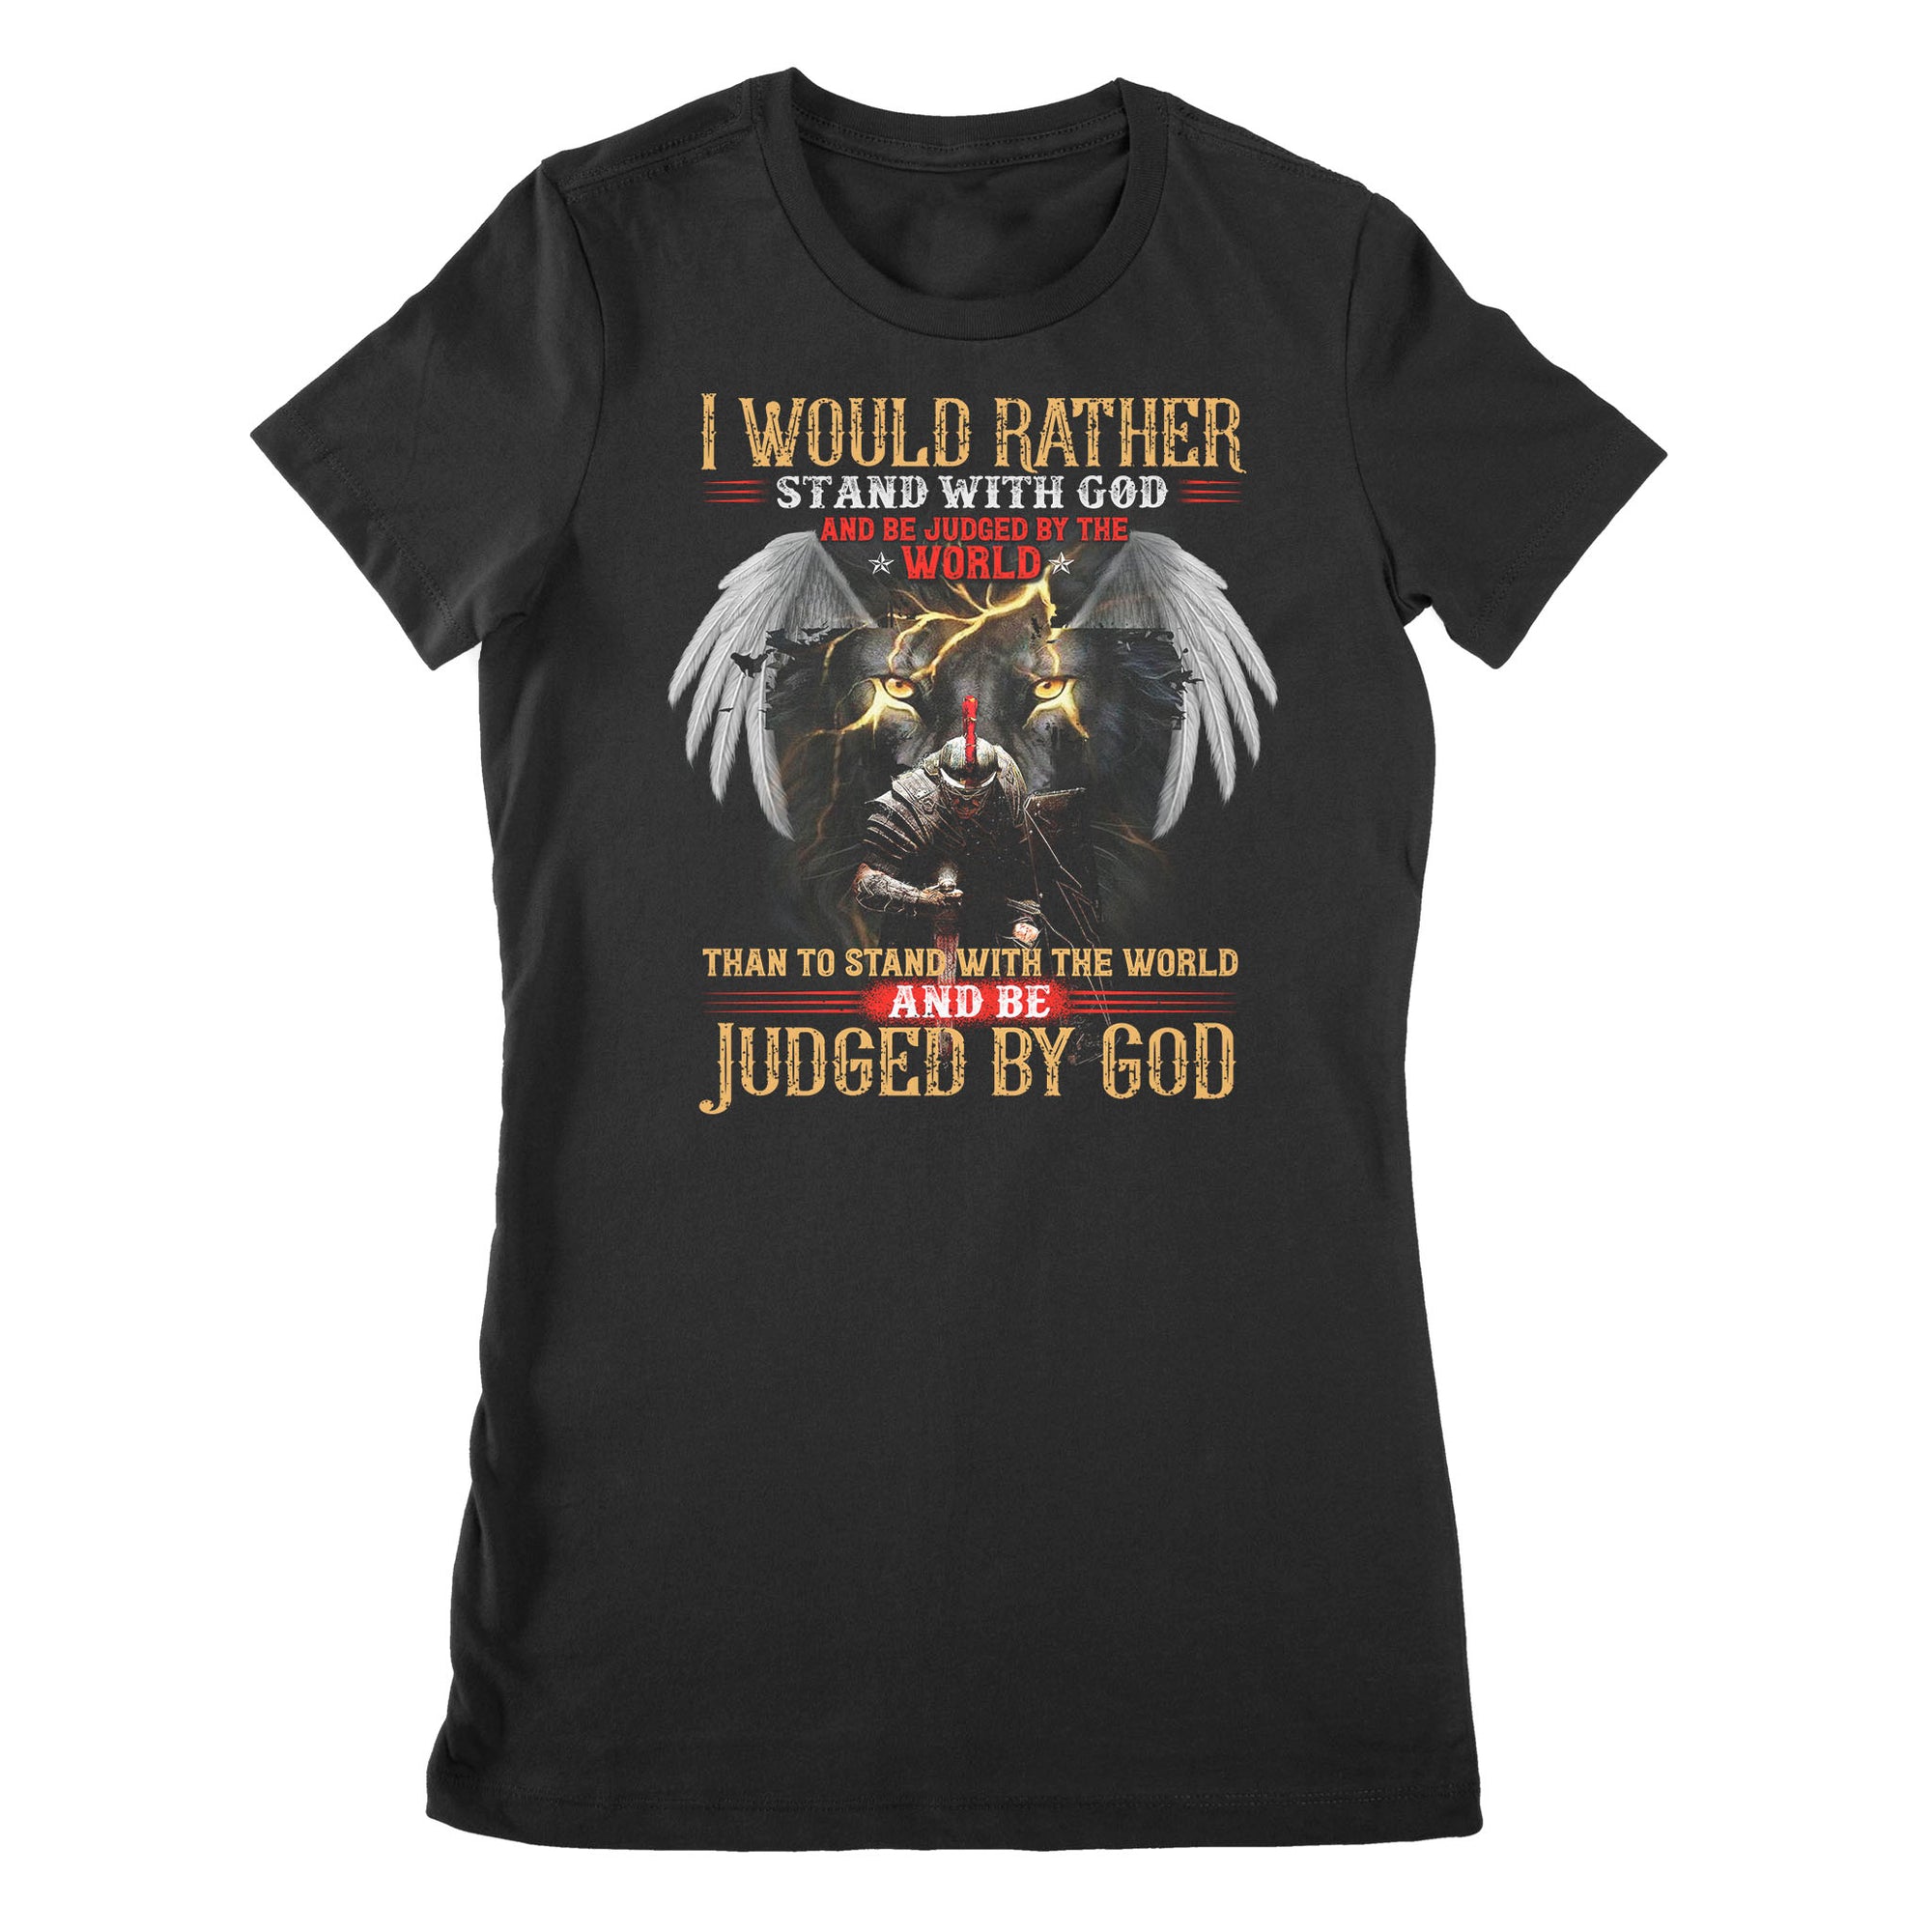 Premium Women's T-shirt - I Would Rather Stand With God And Be Judged By The World Than To Stand With The World And Be Judged By God